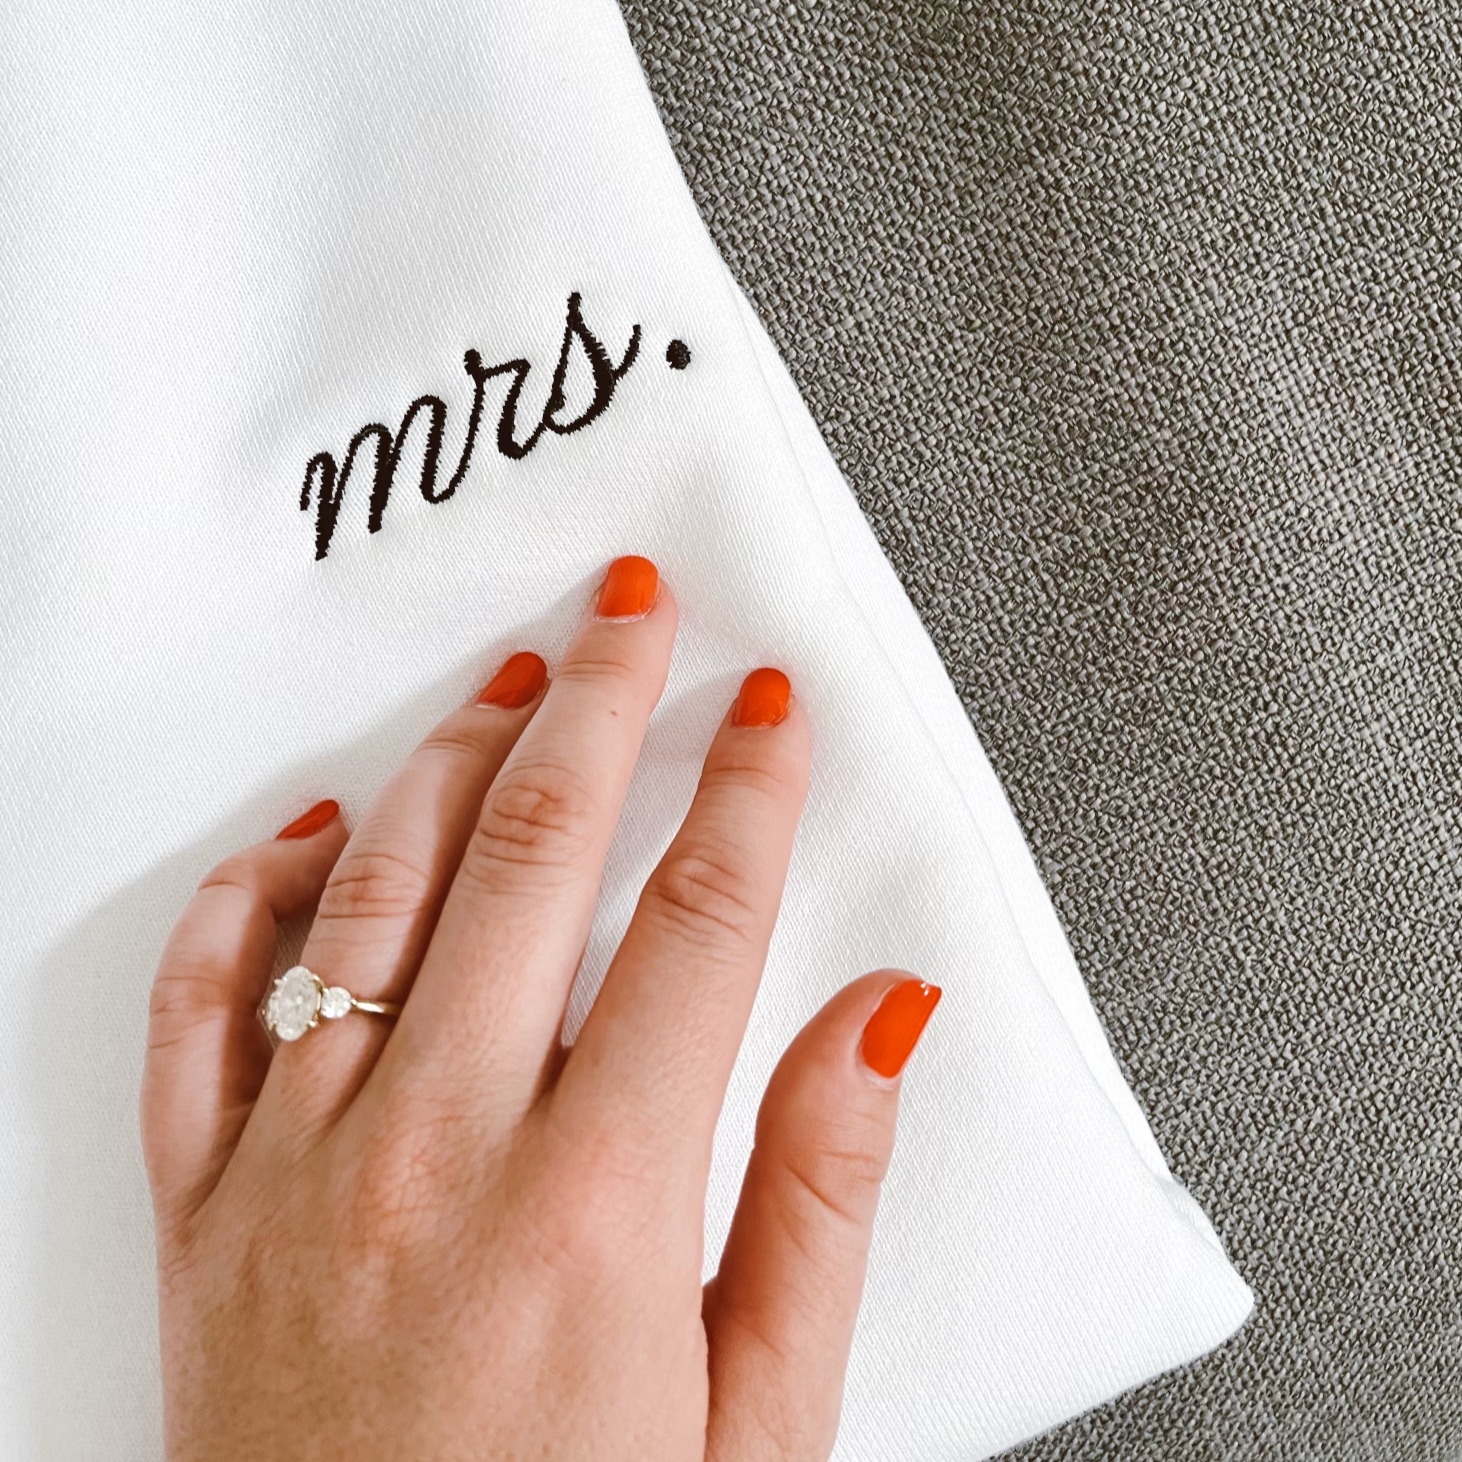 Hand with engagement ring rests on white Mrs. sweatshirt.